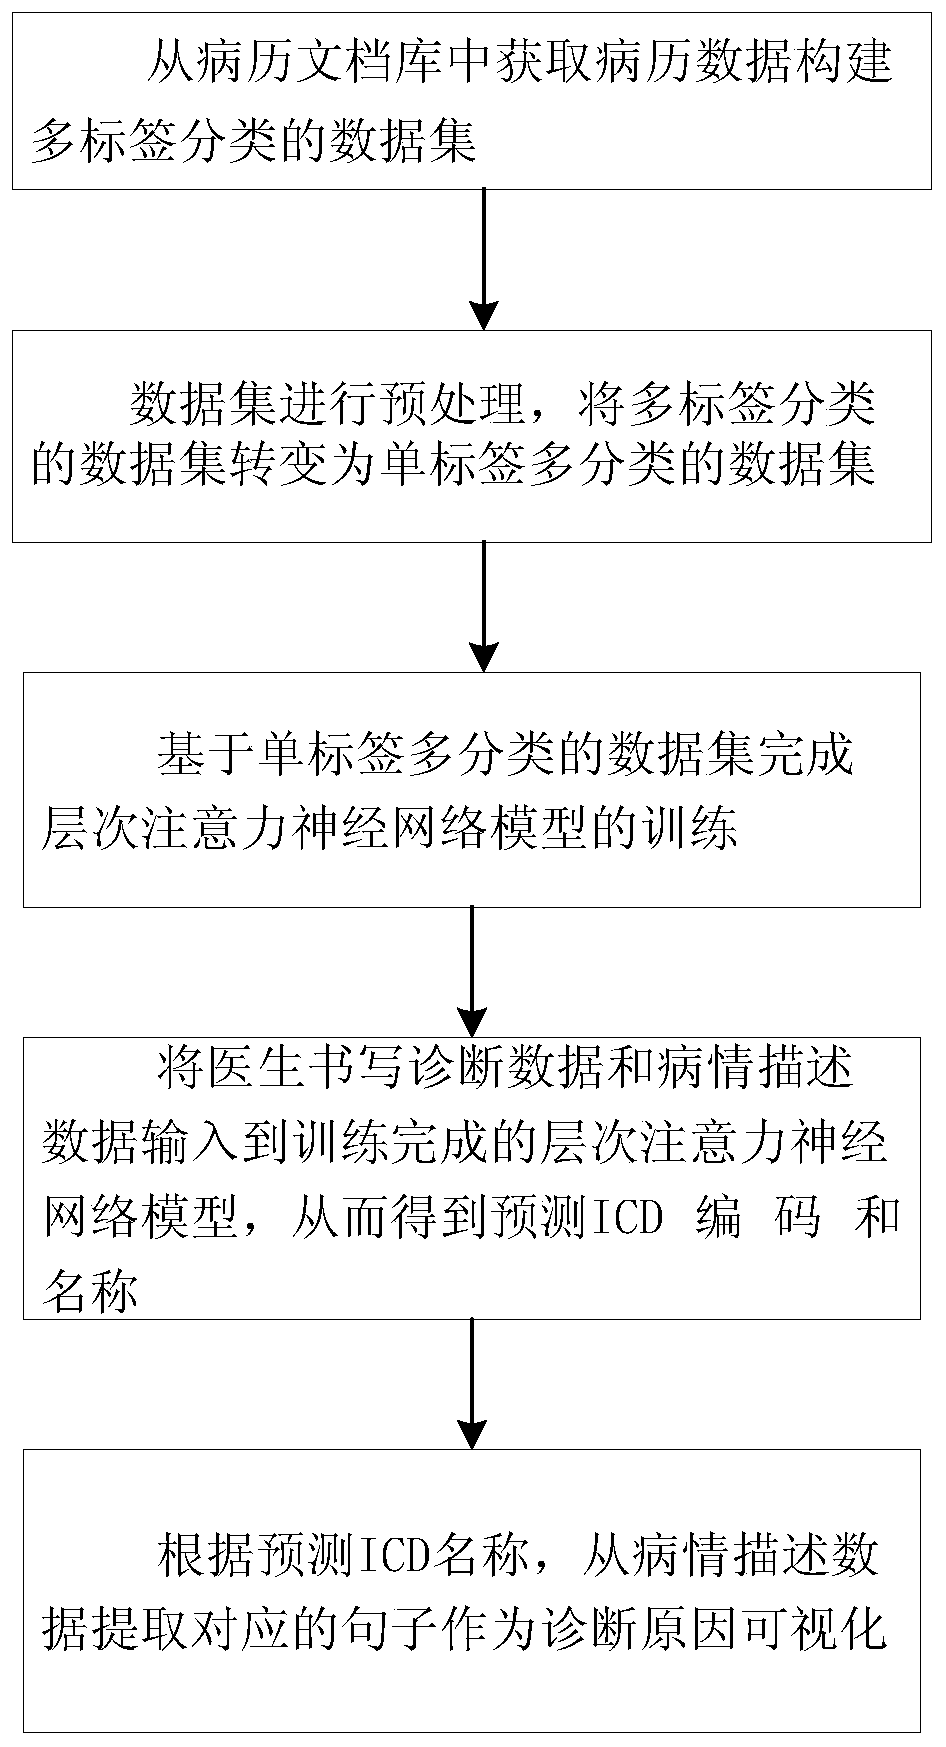 ICD automatic coding method and system for diagnosis reason visualization